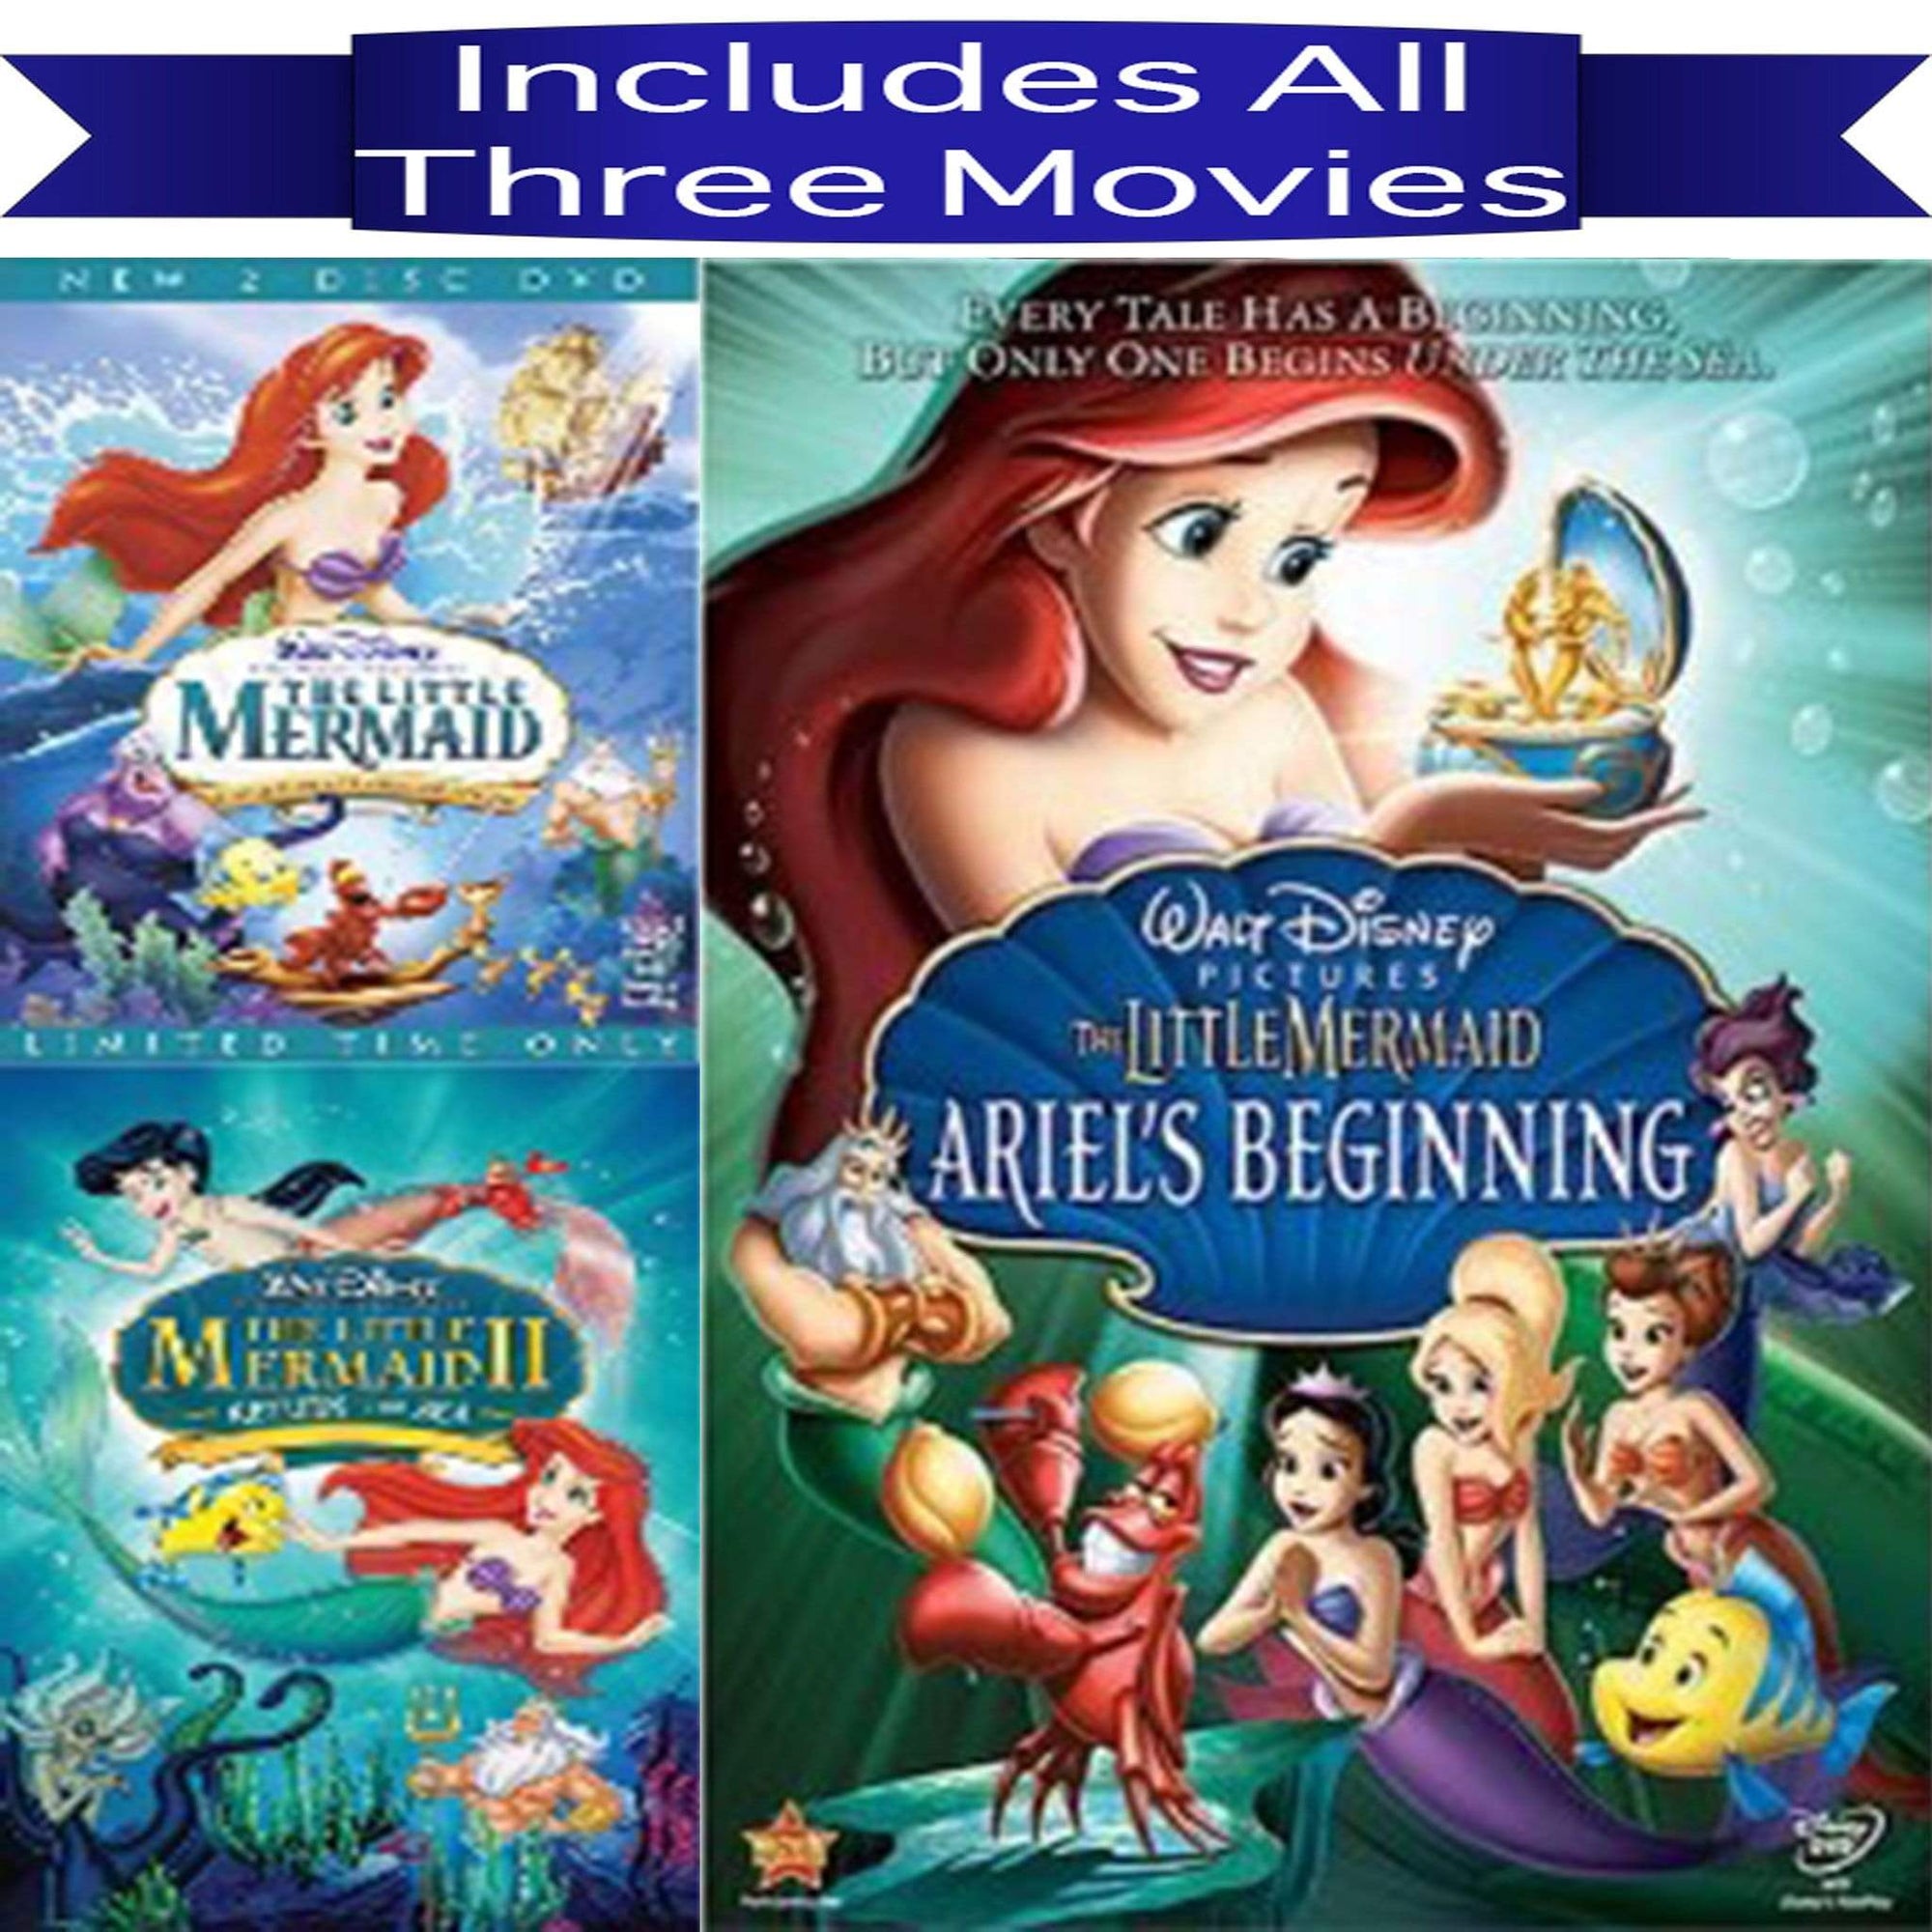 The Little Mermaid Dvd Series Trilogy Set Includes All 3 Movies Pristine Sales